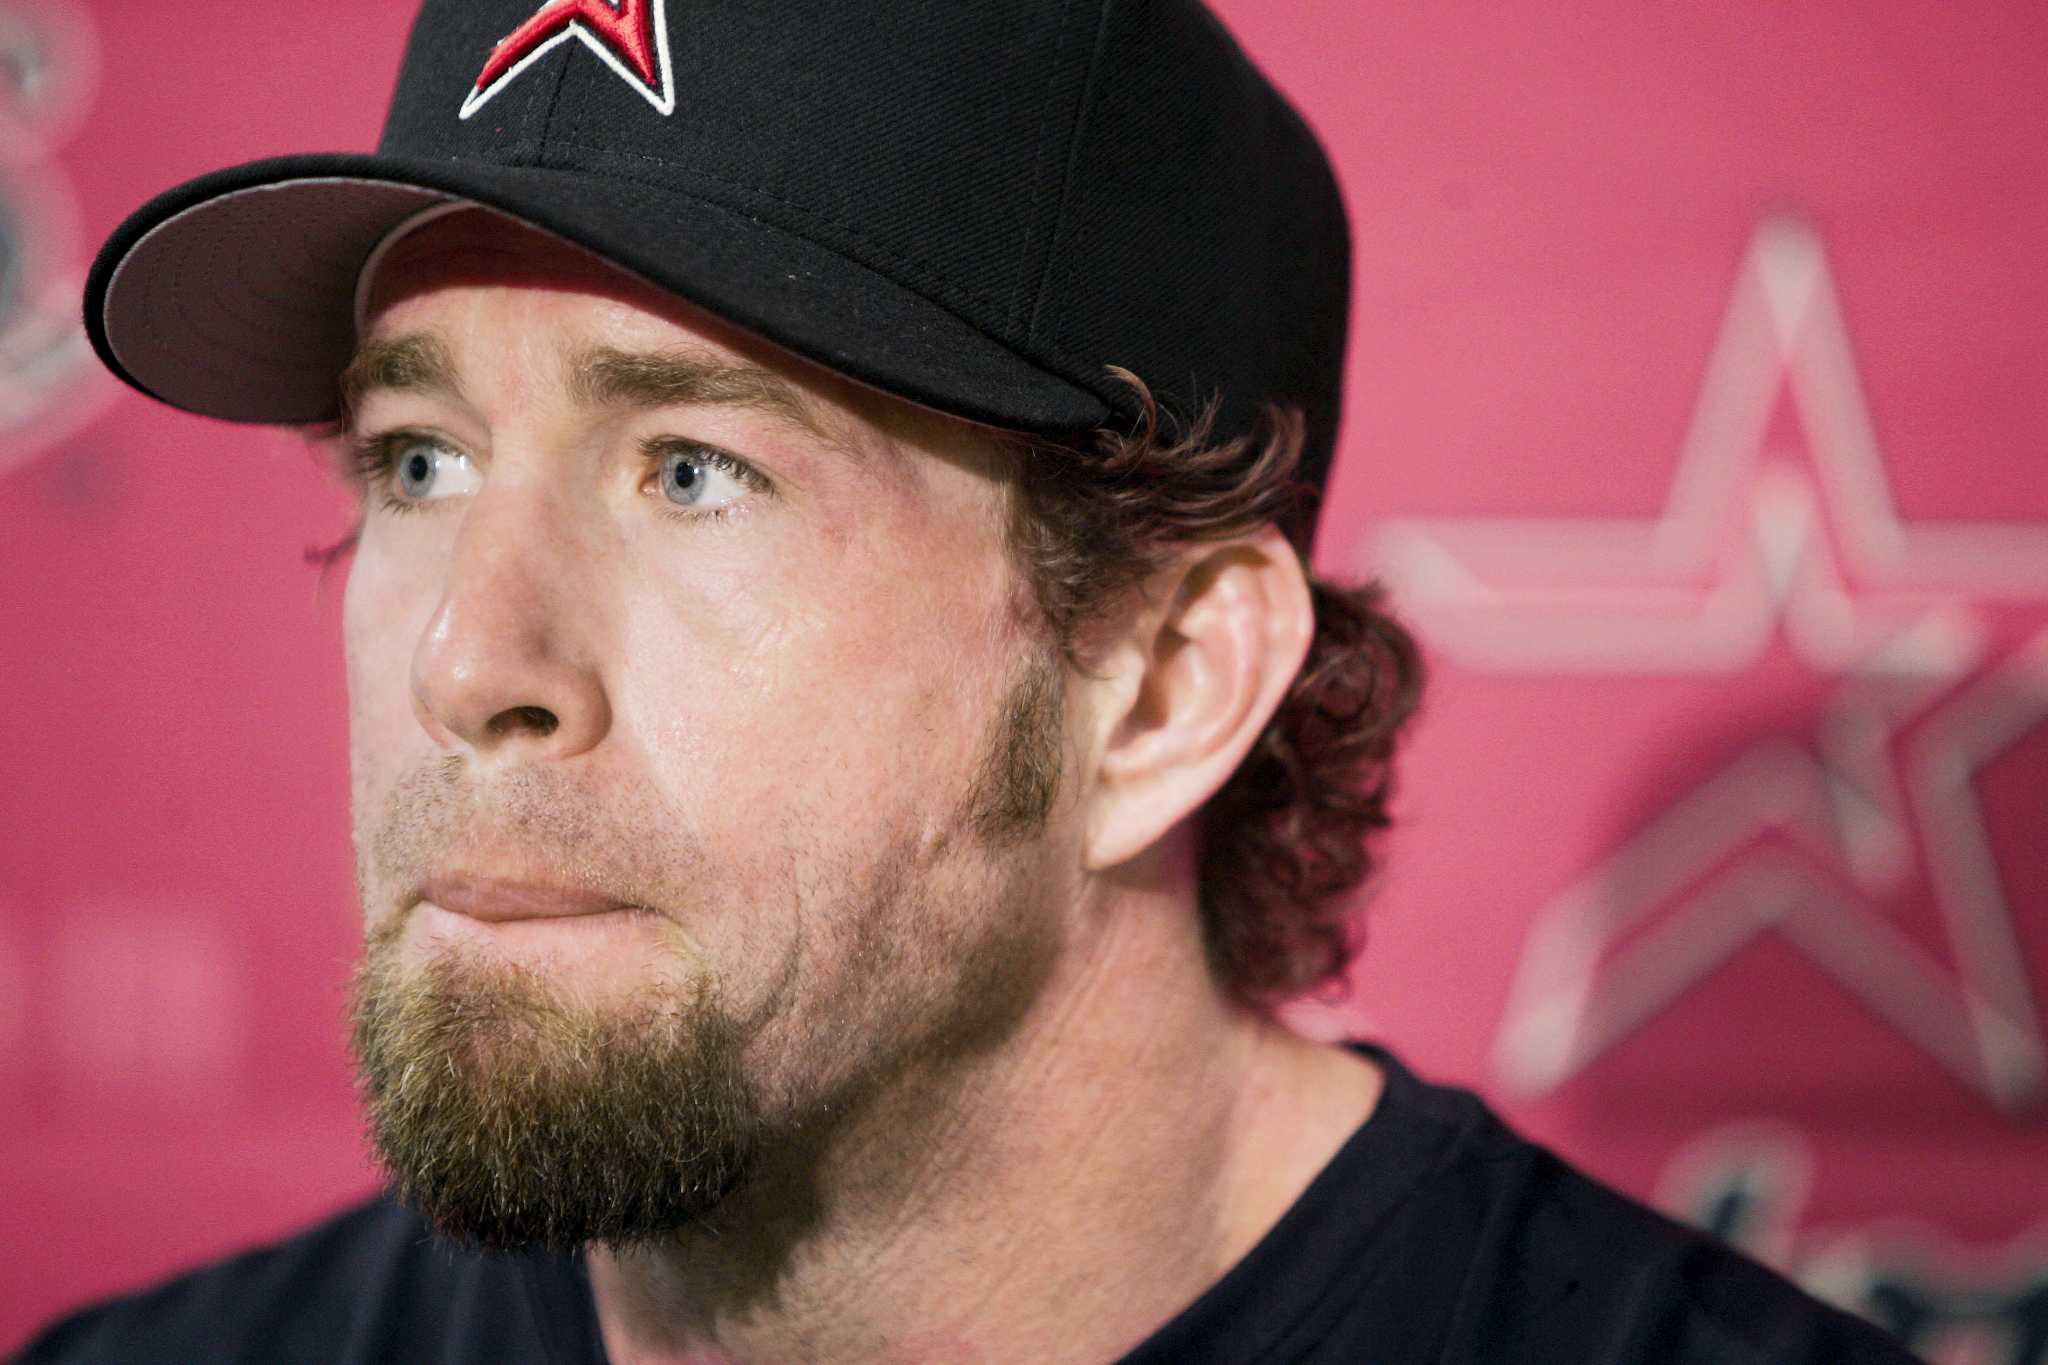 WATCH: Baseball Hall of Fame announcement, Bagwell could get in